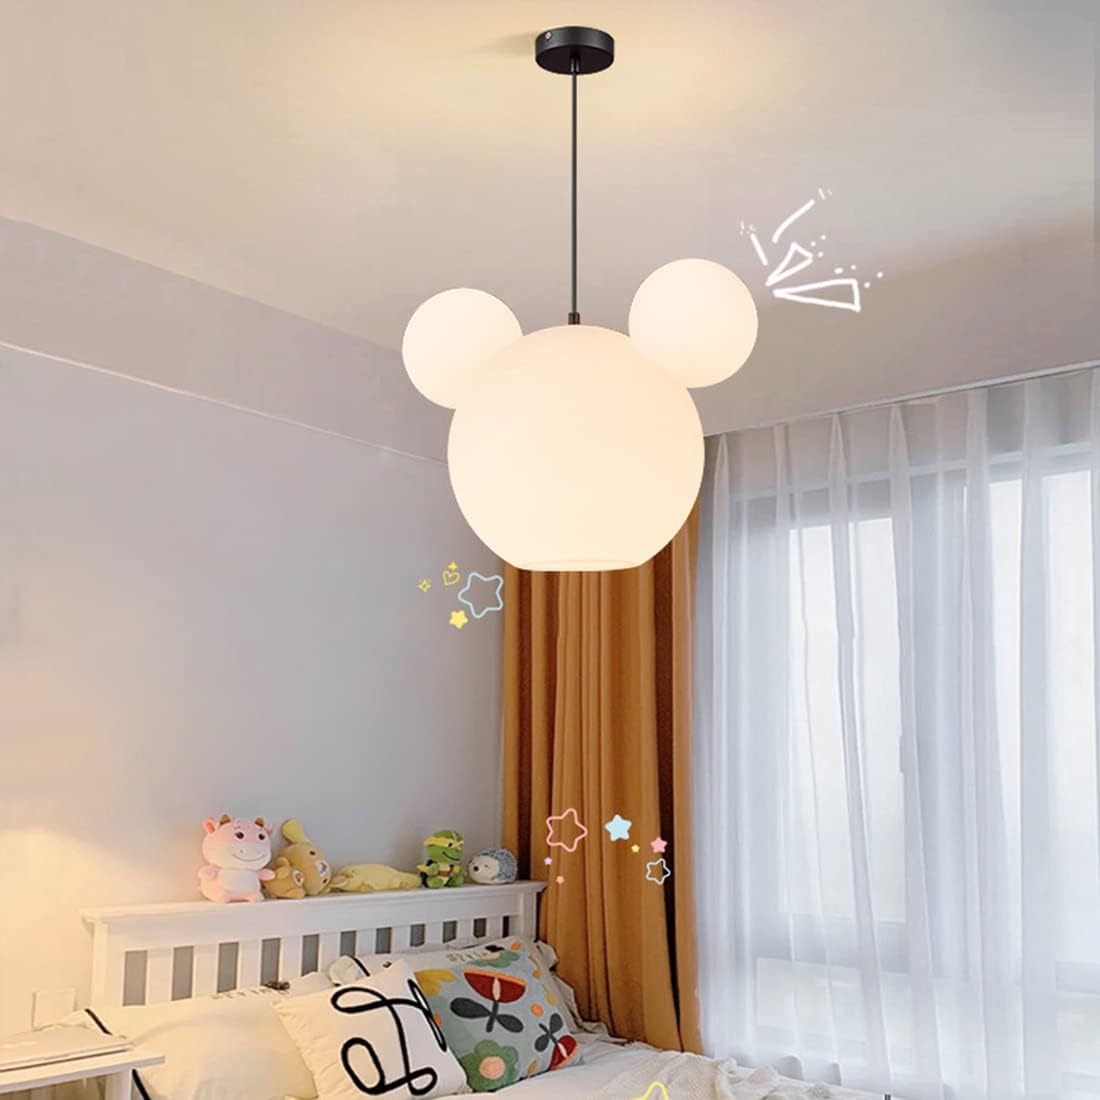 Buy Modern White Mickey Mouse Shape Ceiling Pendant Chandelier - WH-02 | Shop at Supply Master Accra, Ghana Lamps & Lightings Buy Tools hardware Building materials